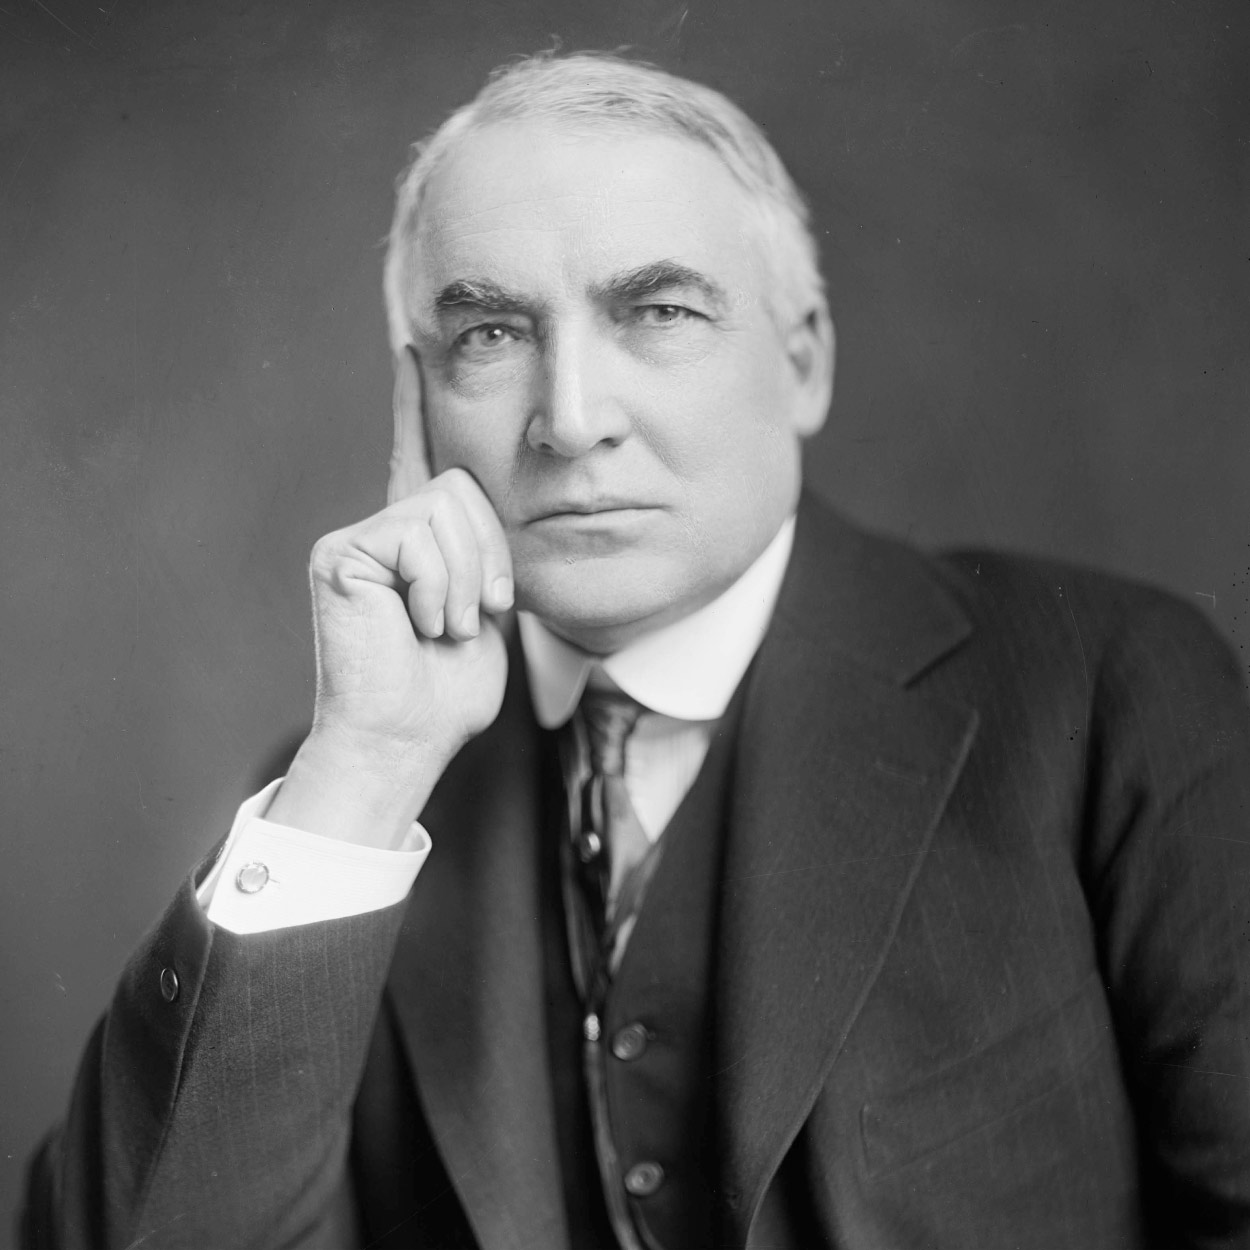 Portrait of Warren G. Harding, the 29th President of the United States